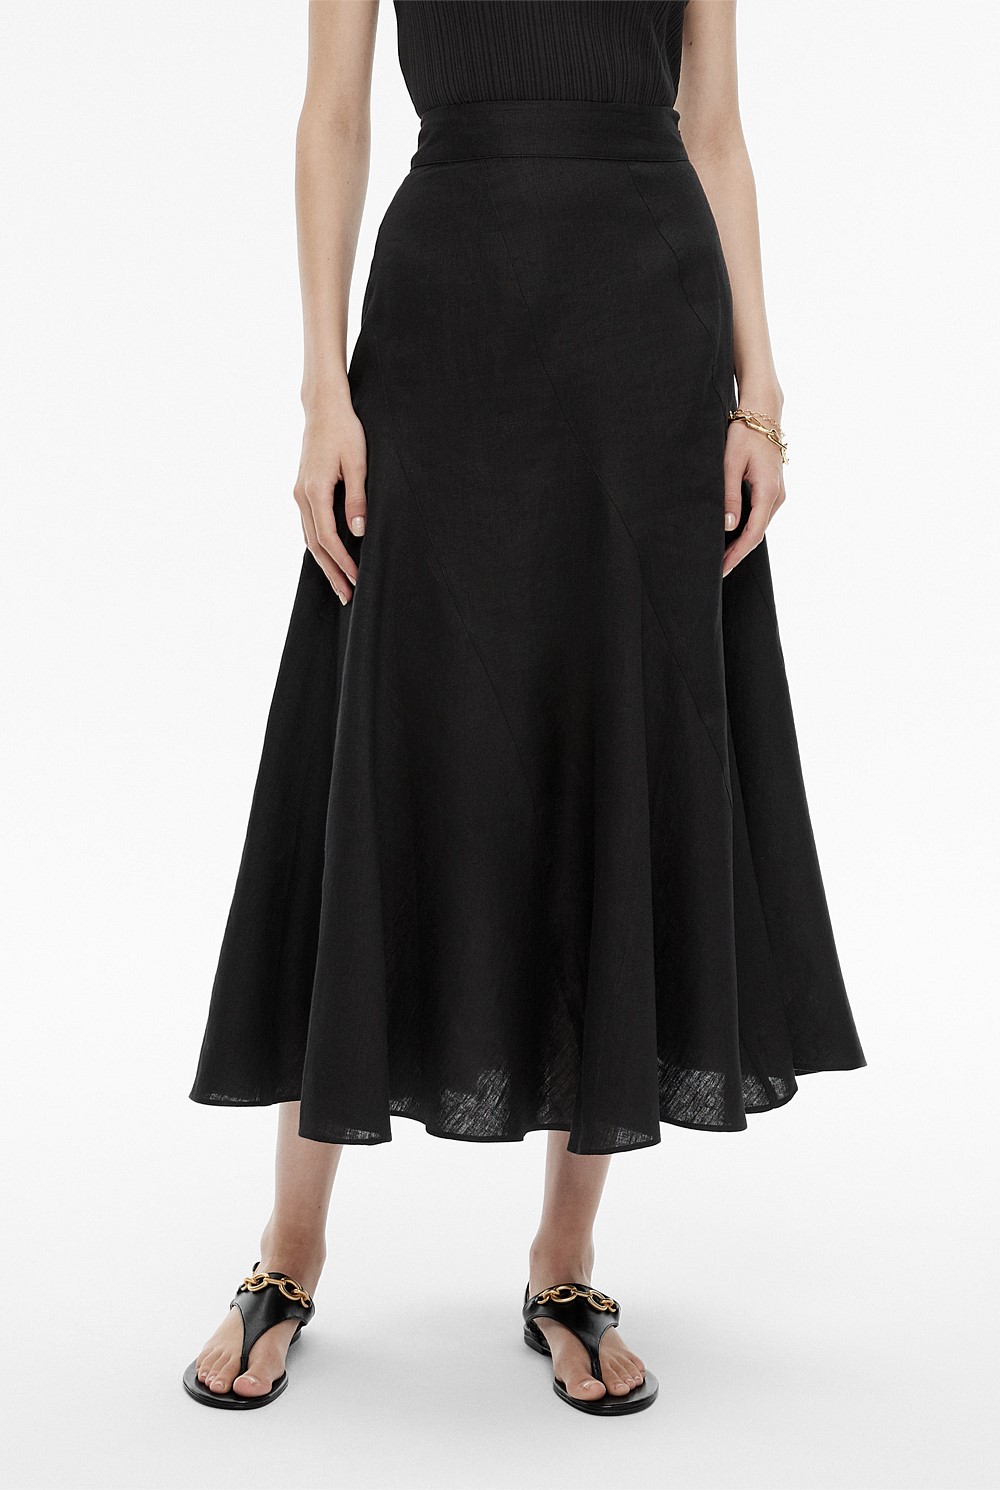 Skirts - Shop Women's Skirts Online - Witchery